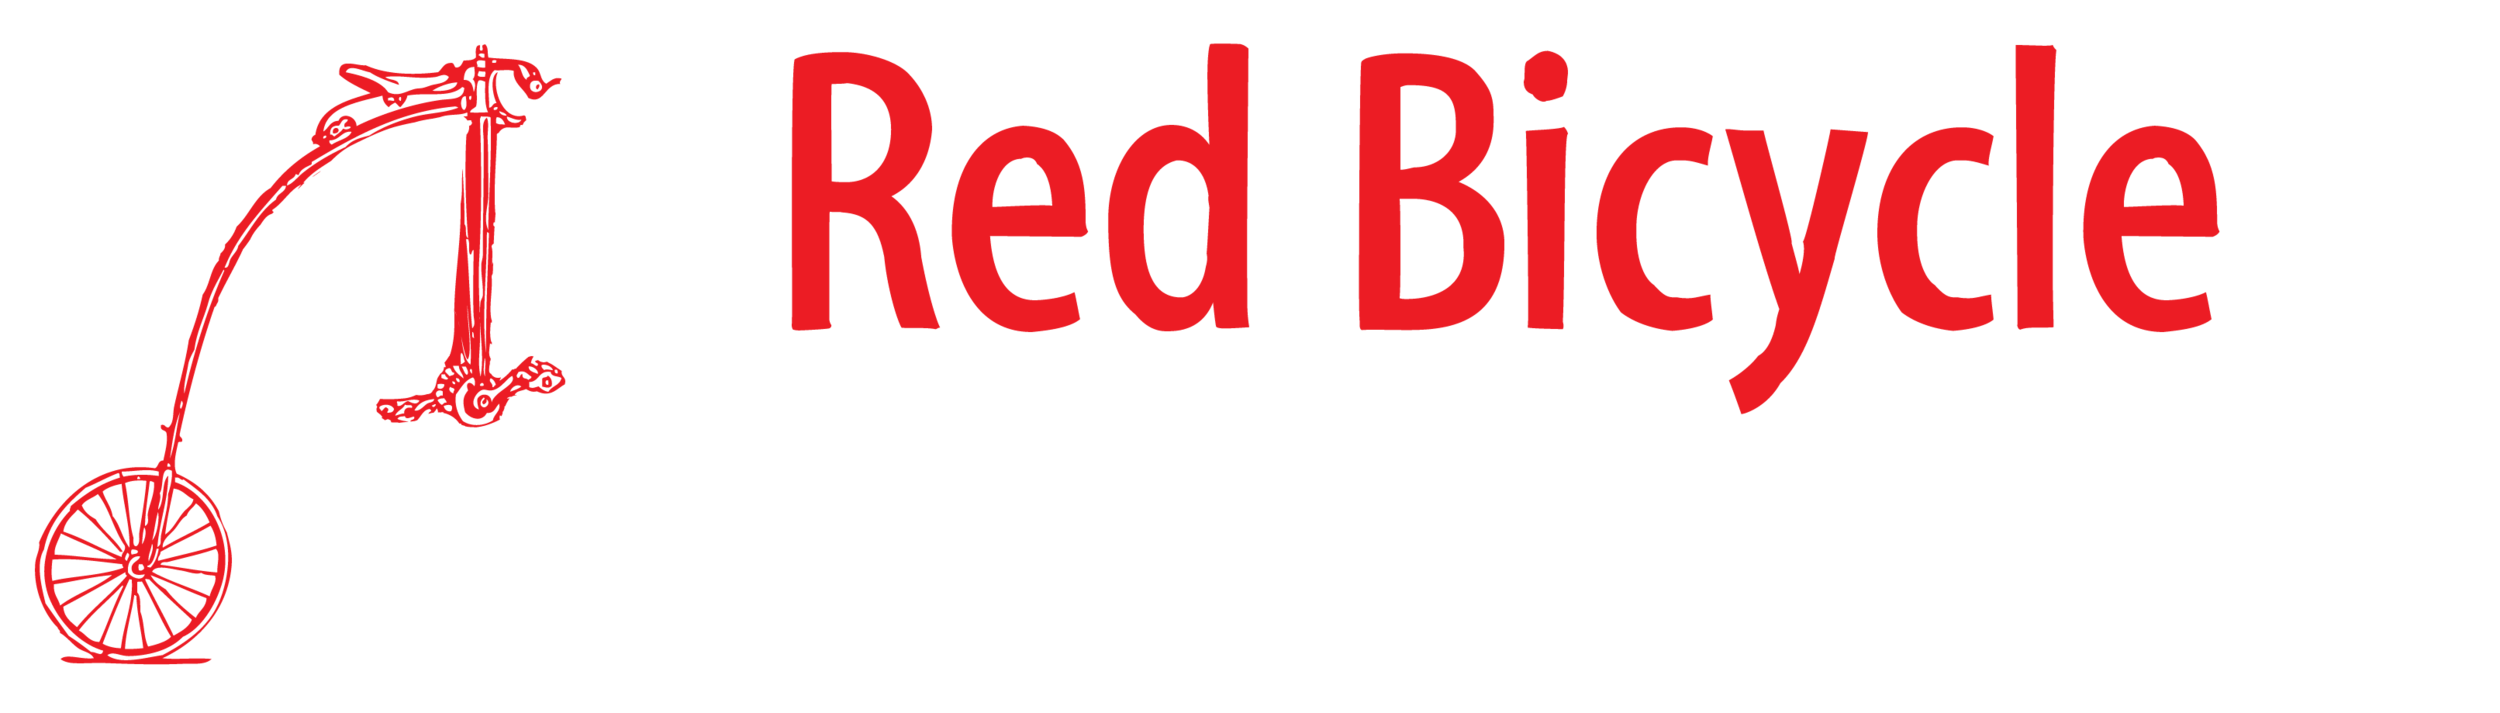 Red Bicycle Breadworks